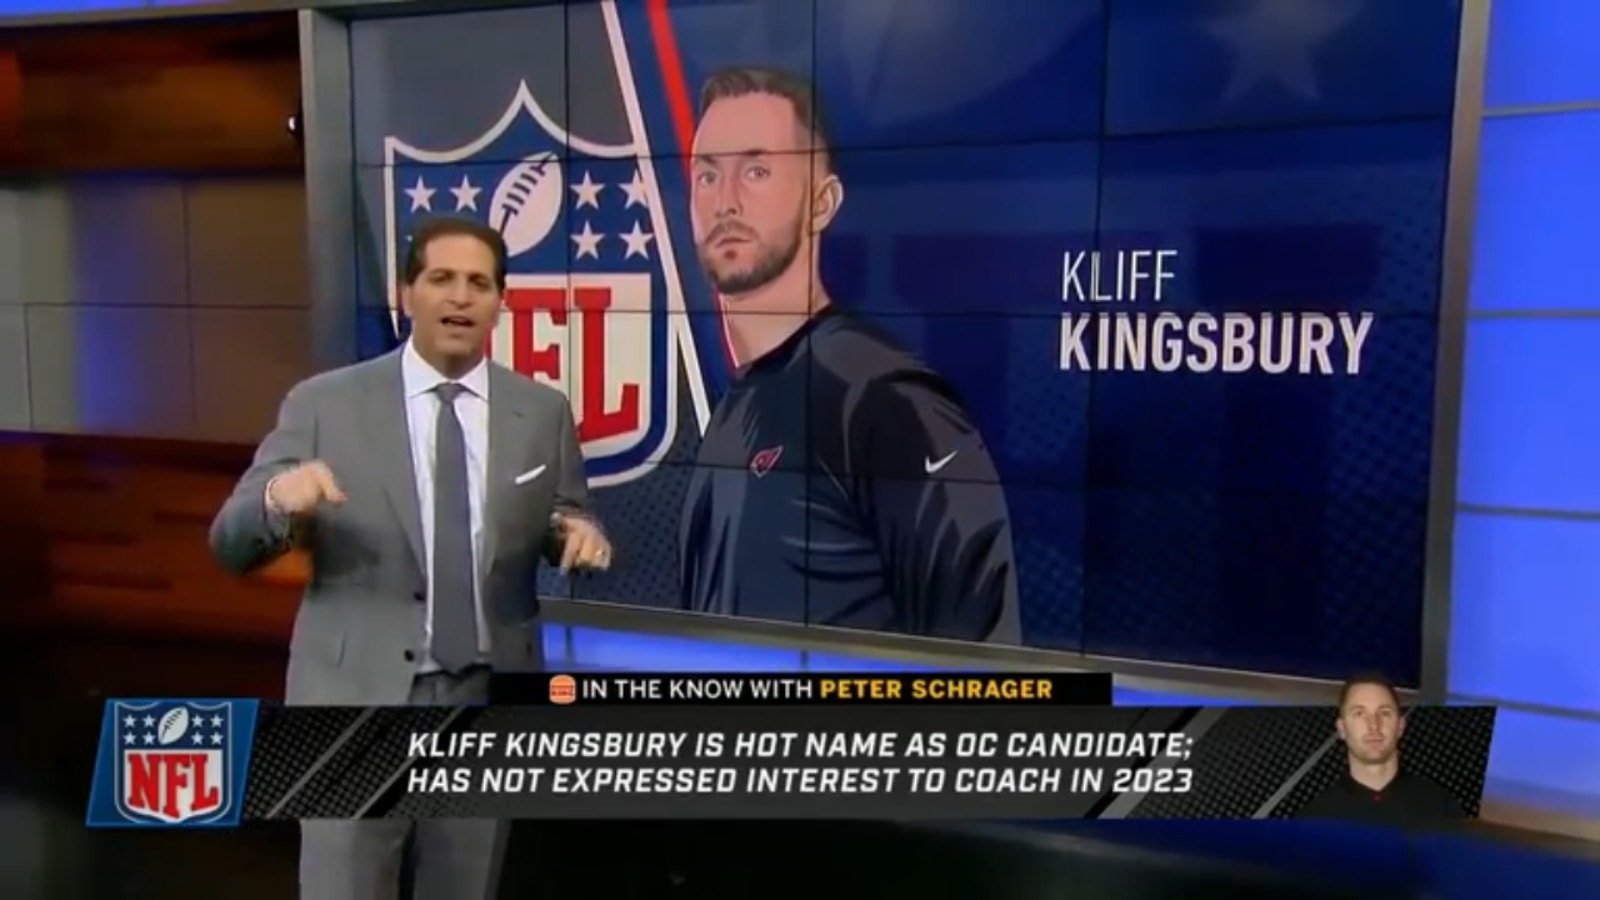 Peter Schrager gives an update on Kliff Kingsbury